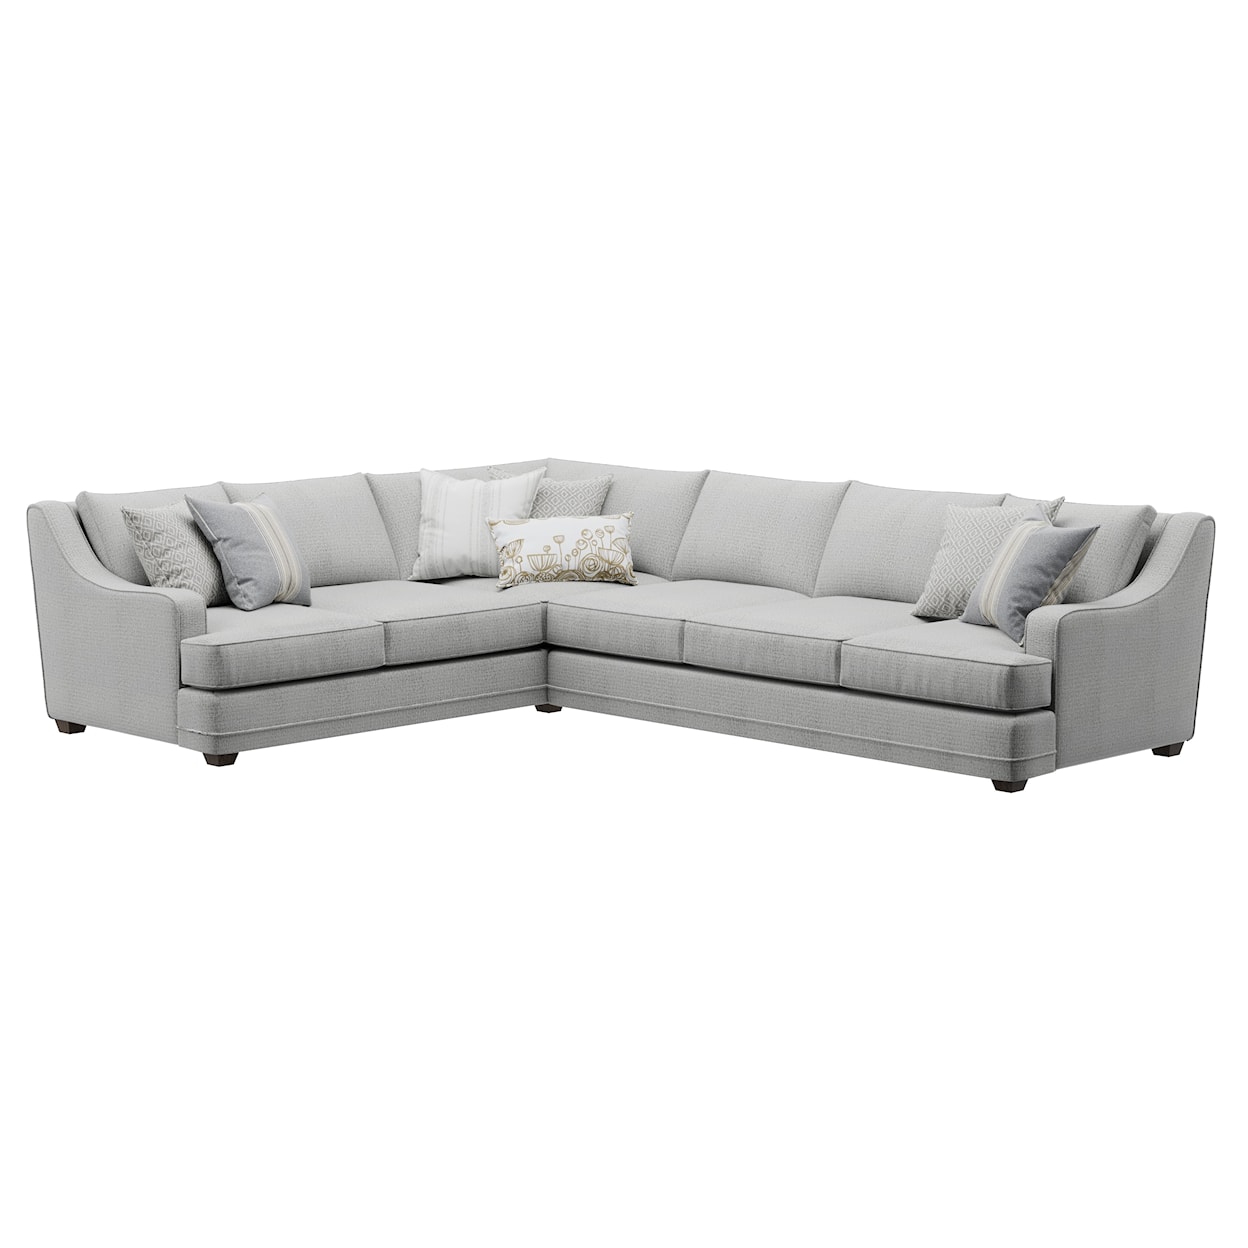 VFM Signature 7000 LIMELIGHT MINERAL 2-Piece Sectional